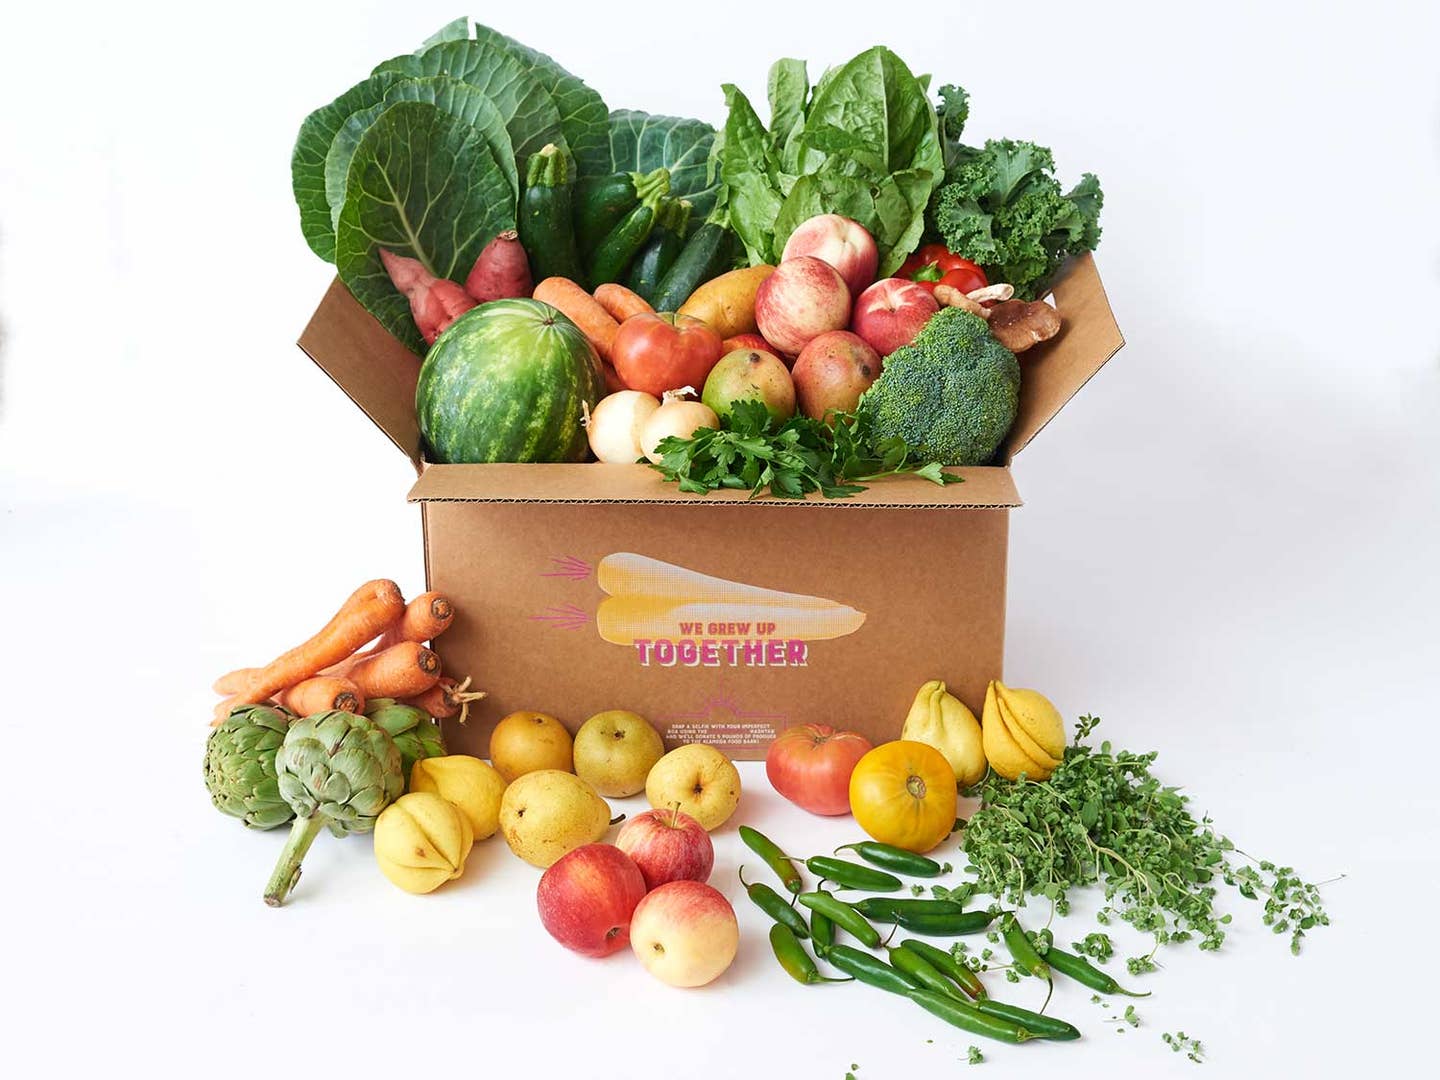 This Produce Delivery Service Wants You to Start Eating the “Ugly” Vegetables Too